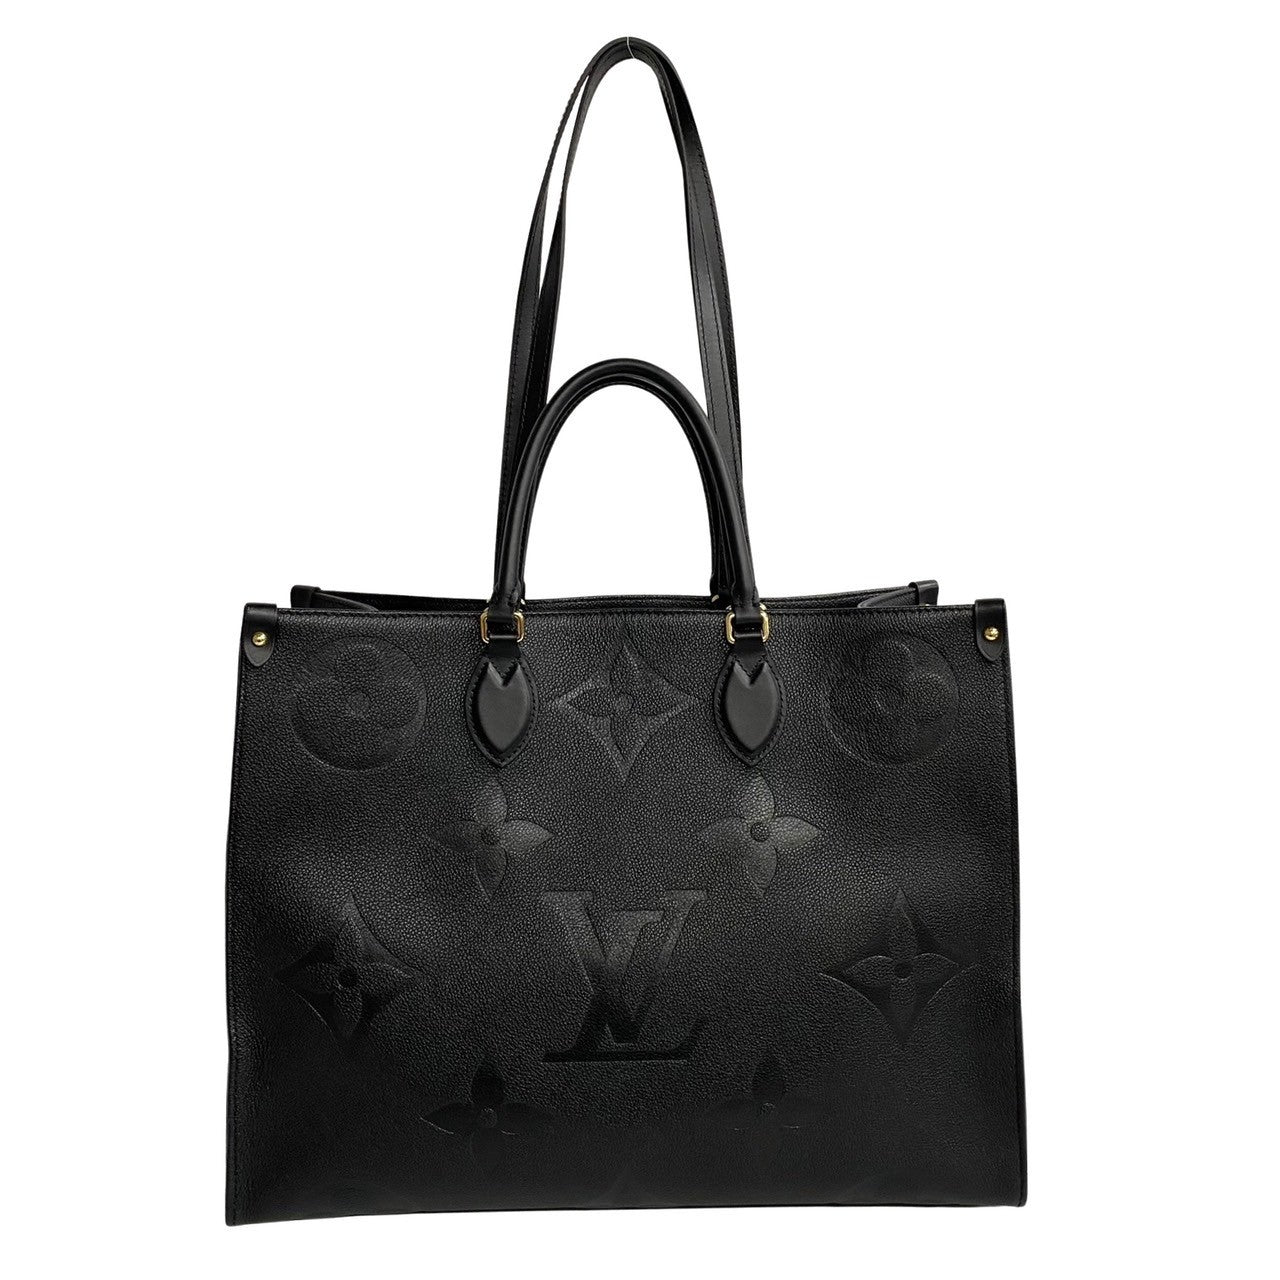 Louis Vuitton On The Go GM Leather Tote Bag M44925 in Excellent condition